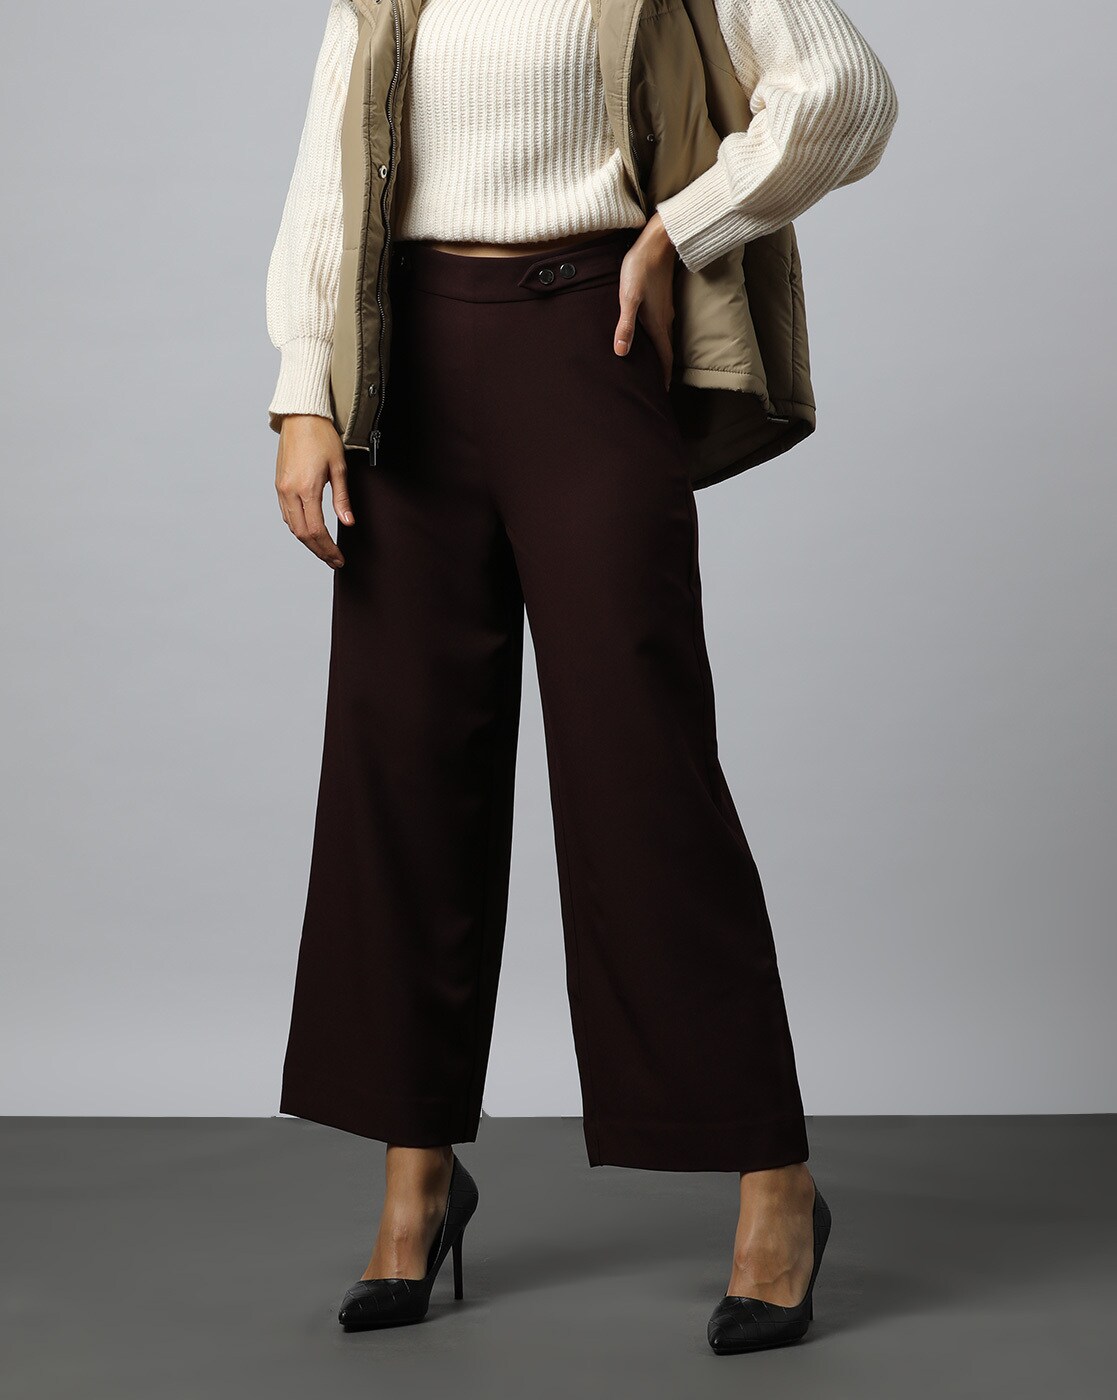 Buy Burgundy Trousers  Pants for Women by Outryt Online  Ajiocom